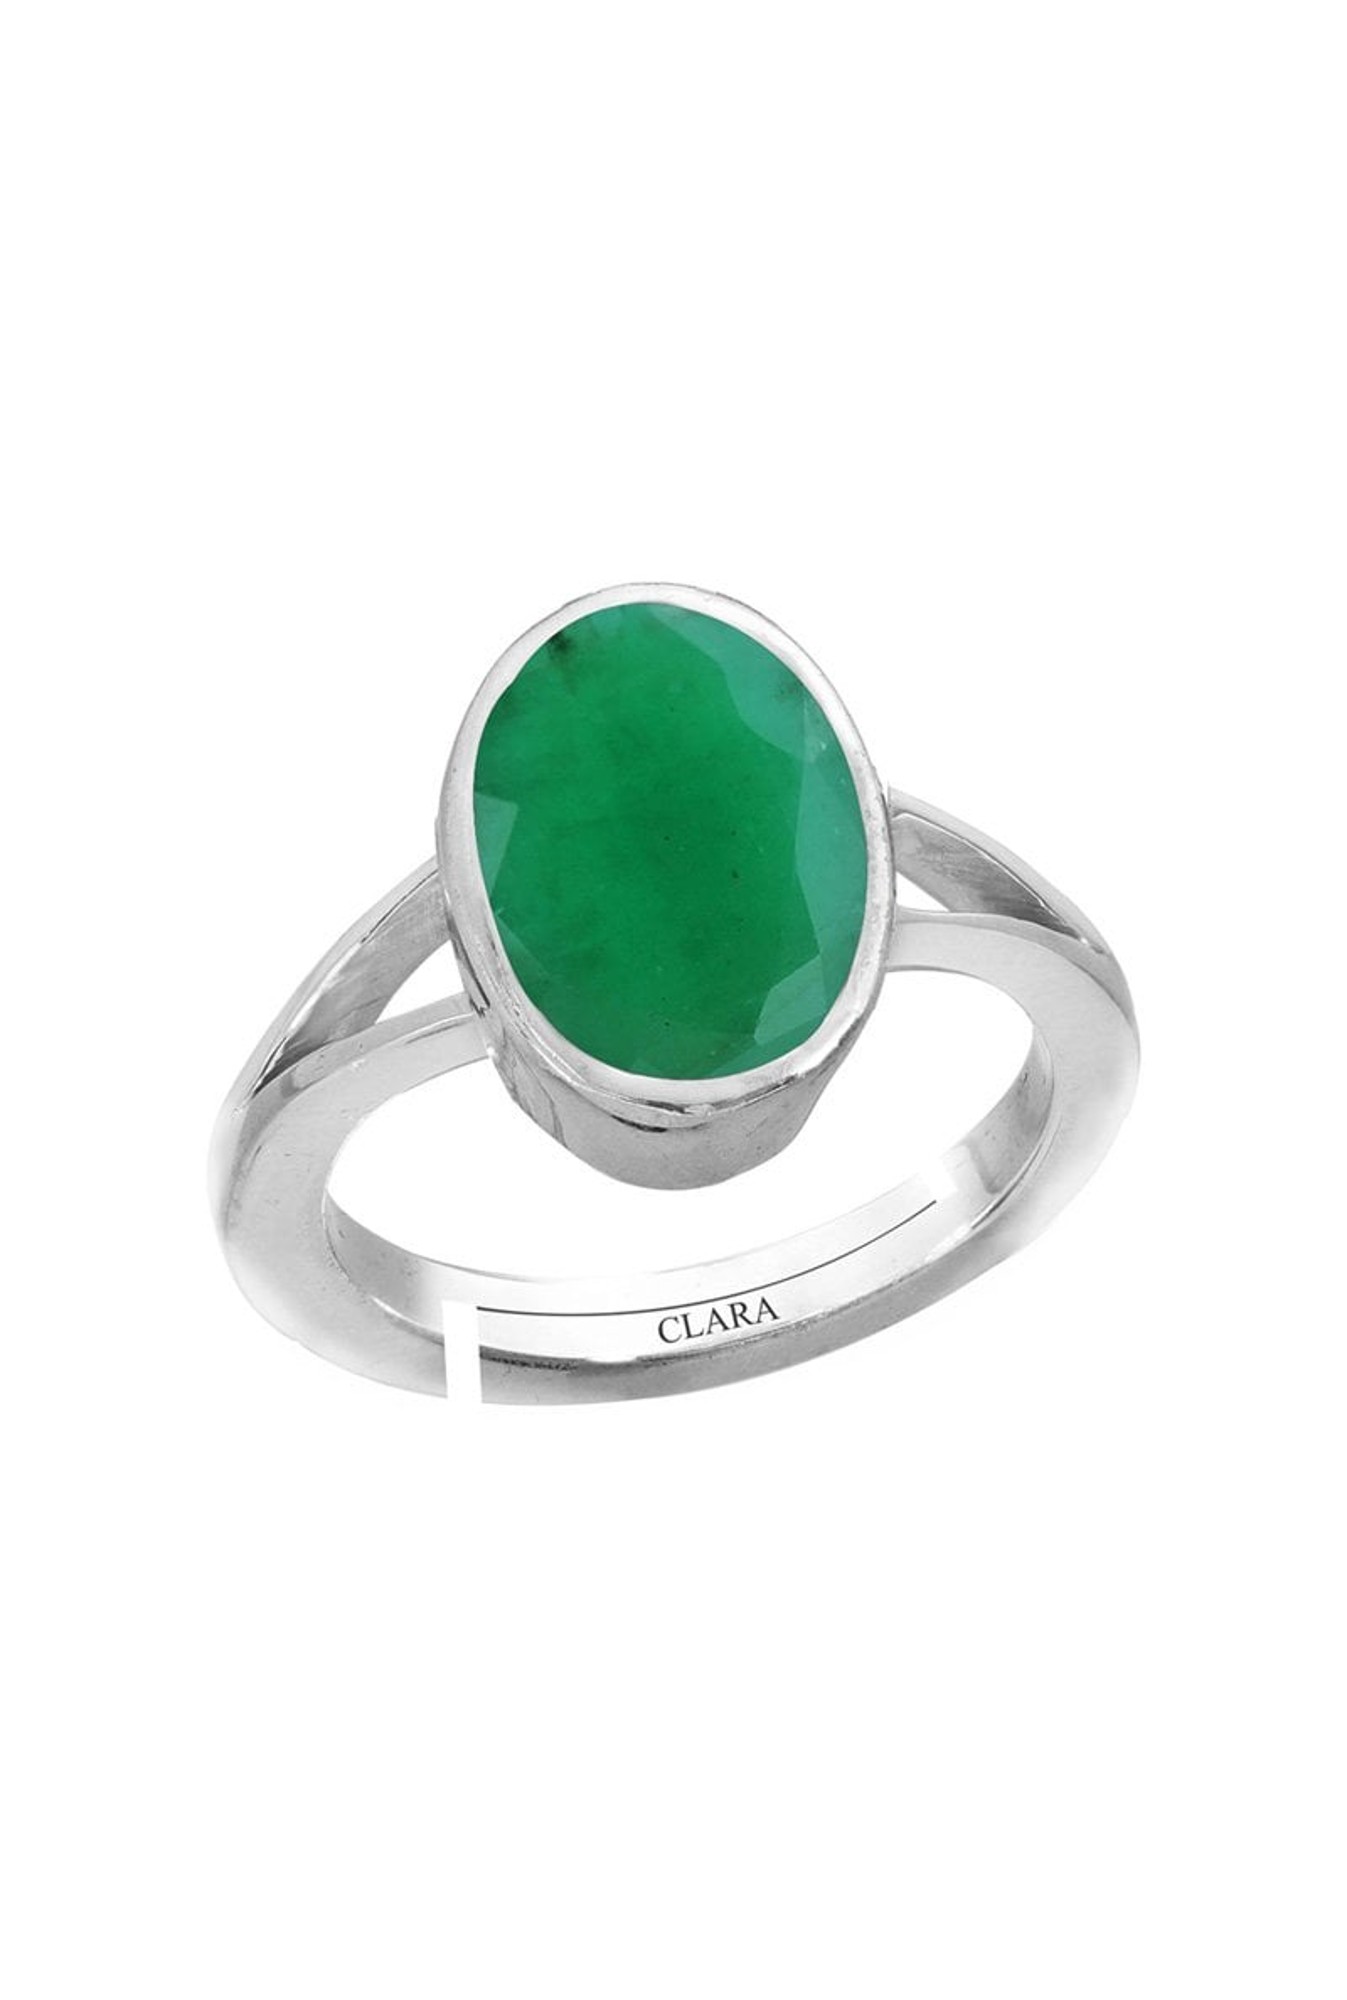 MASOP Emerald Color Green Stone Ring Stainless Steel India | Ubuy